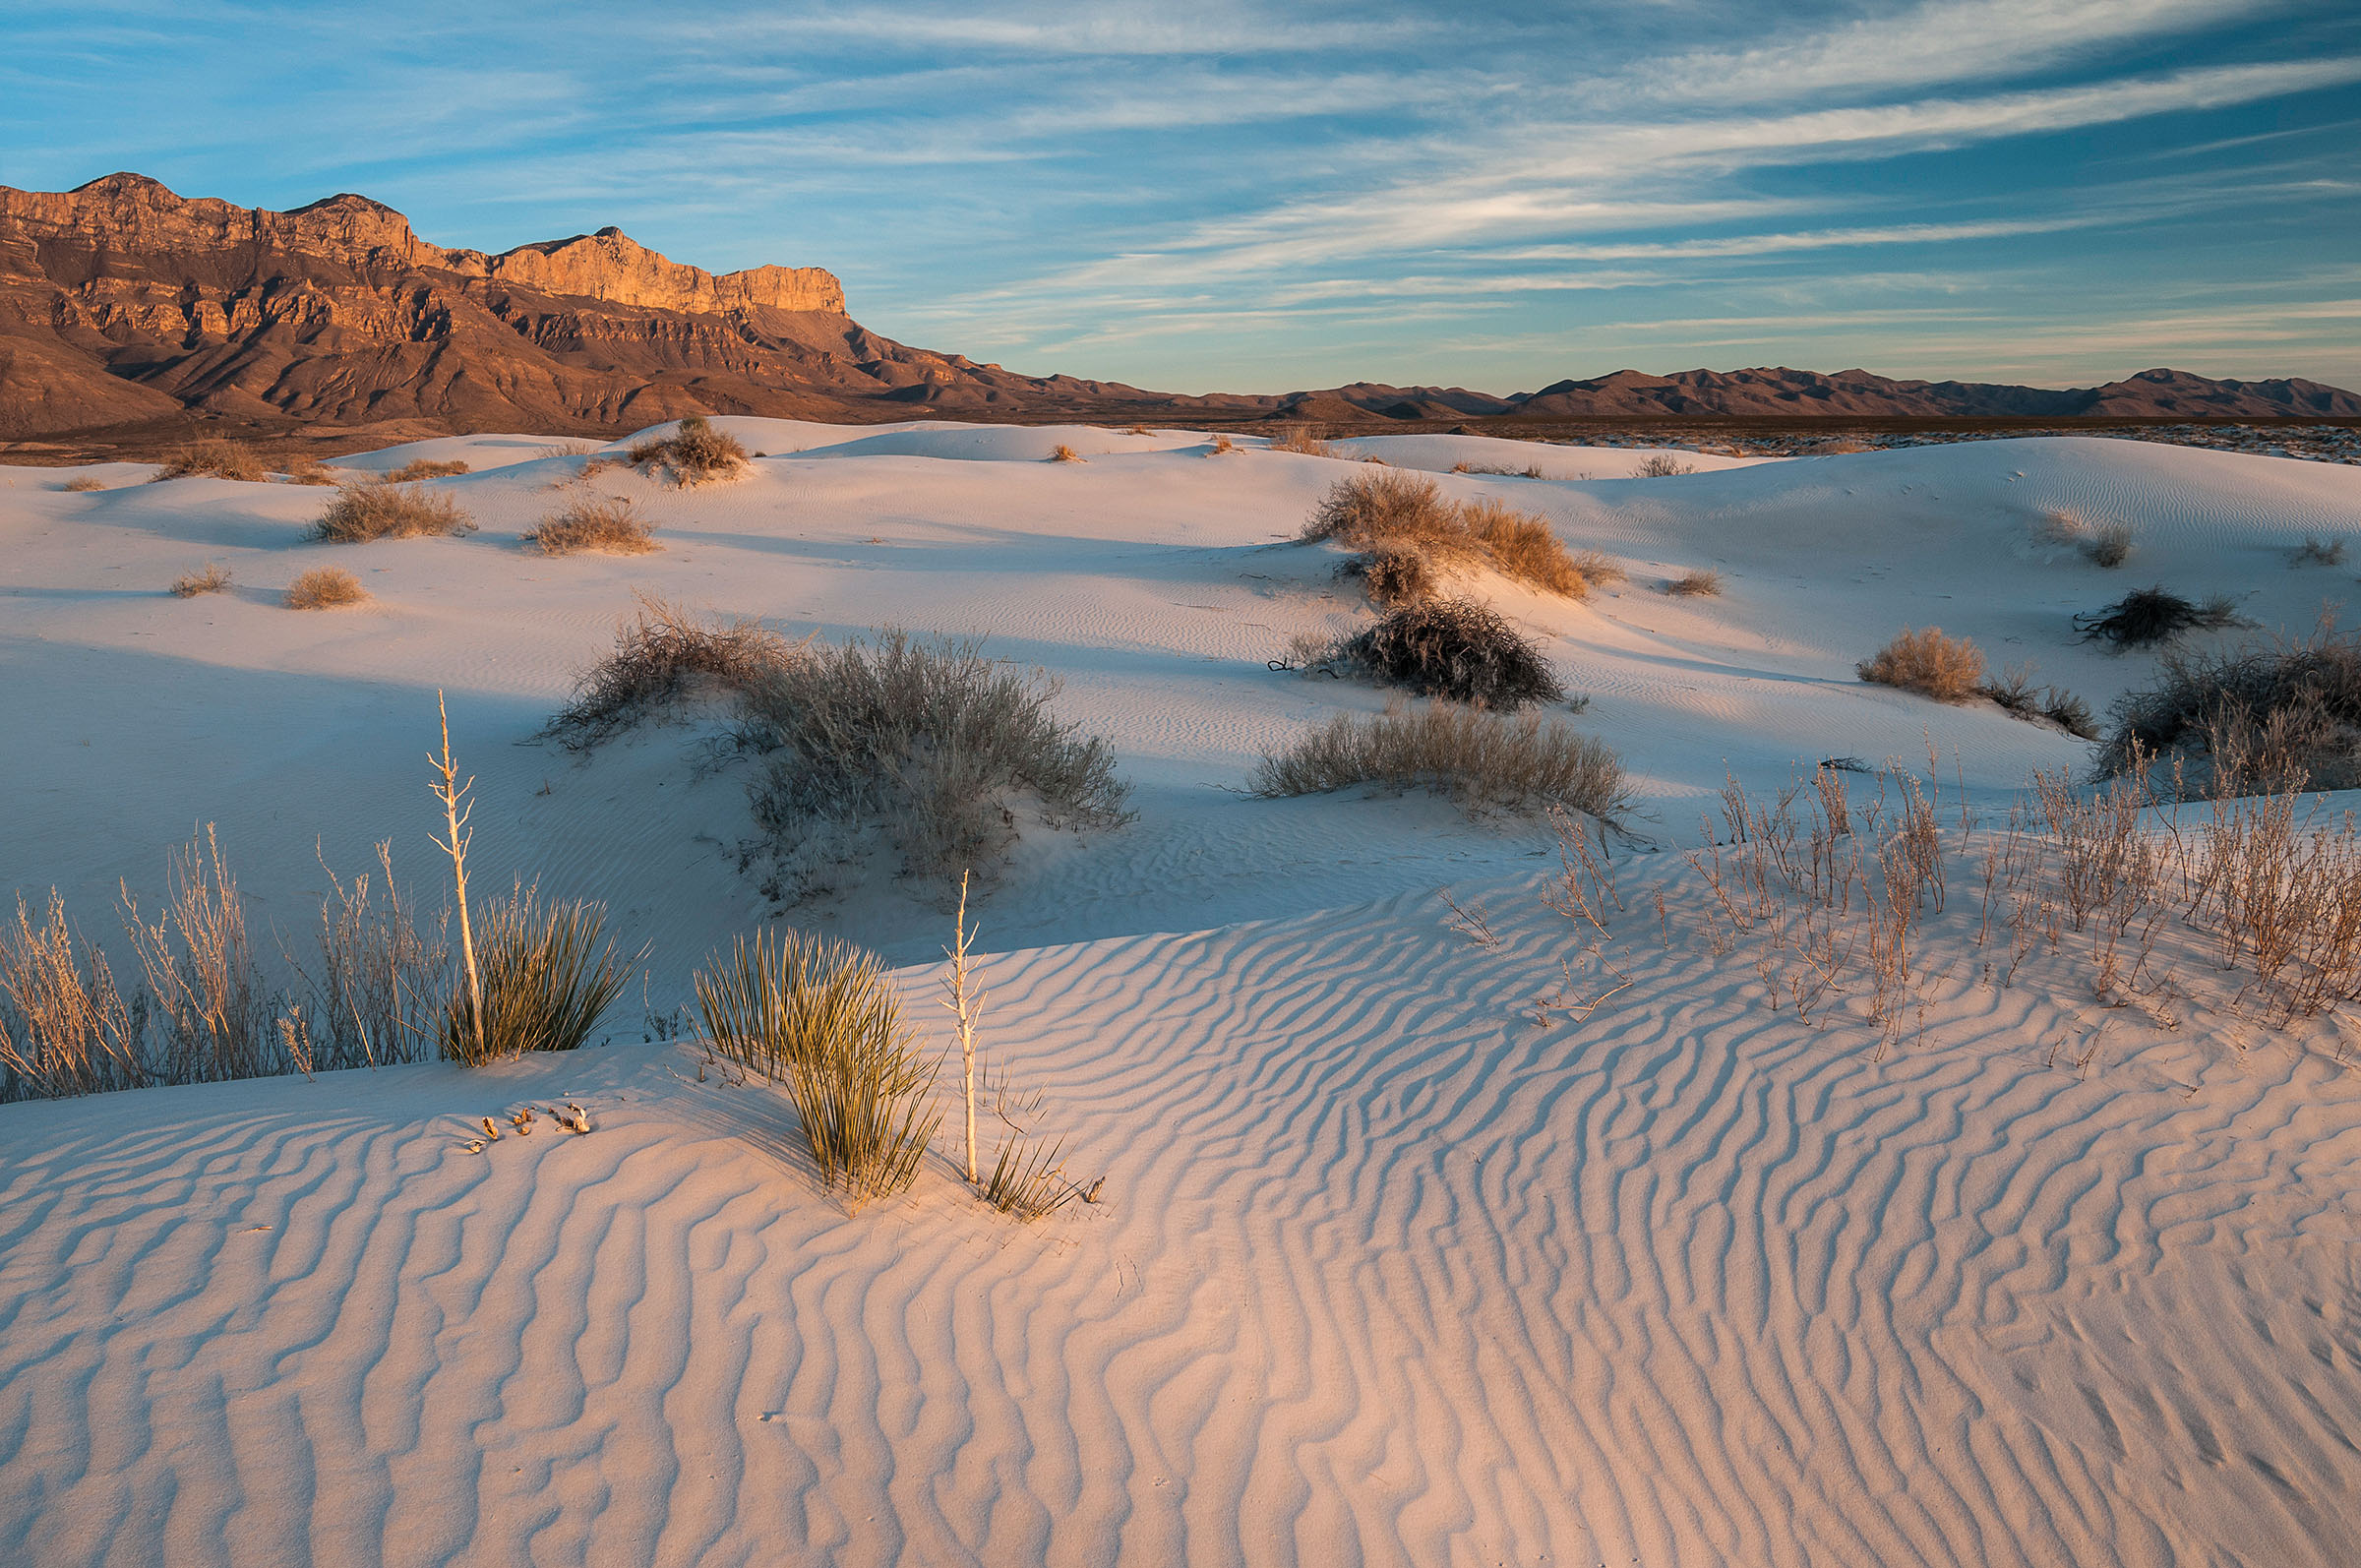 Grasses grow from sand dunes in Guadalupe Mountains